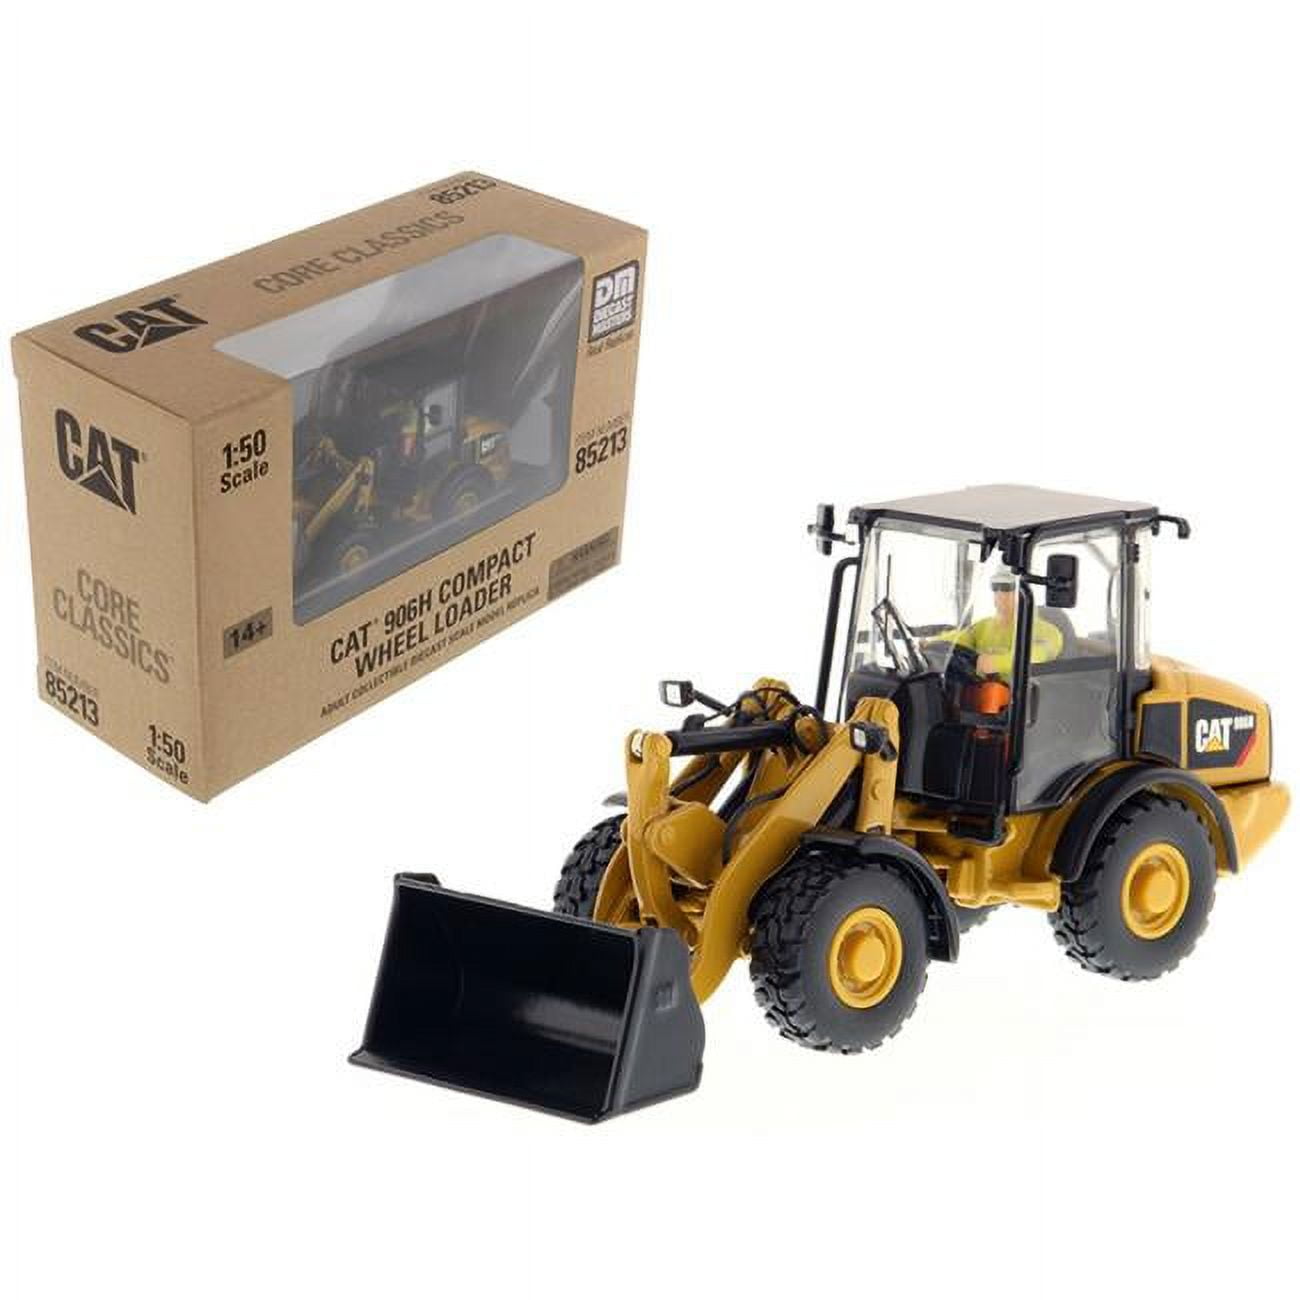 85213c 1 By 50 Scale Diecast Compact Wheel Loader For Cat Caterpillar 906h Model